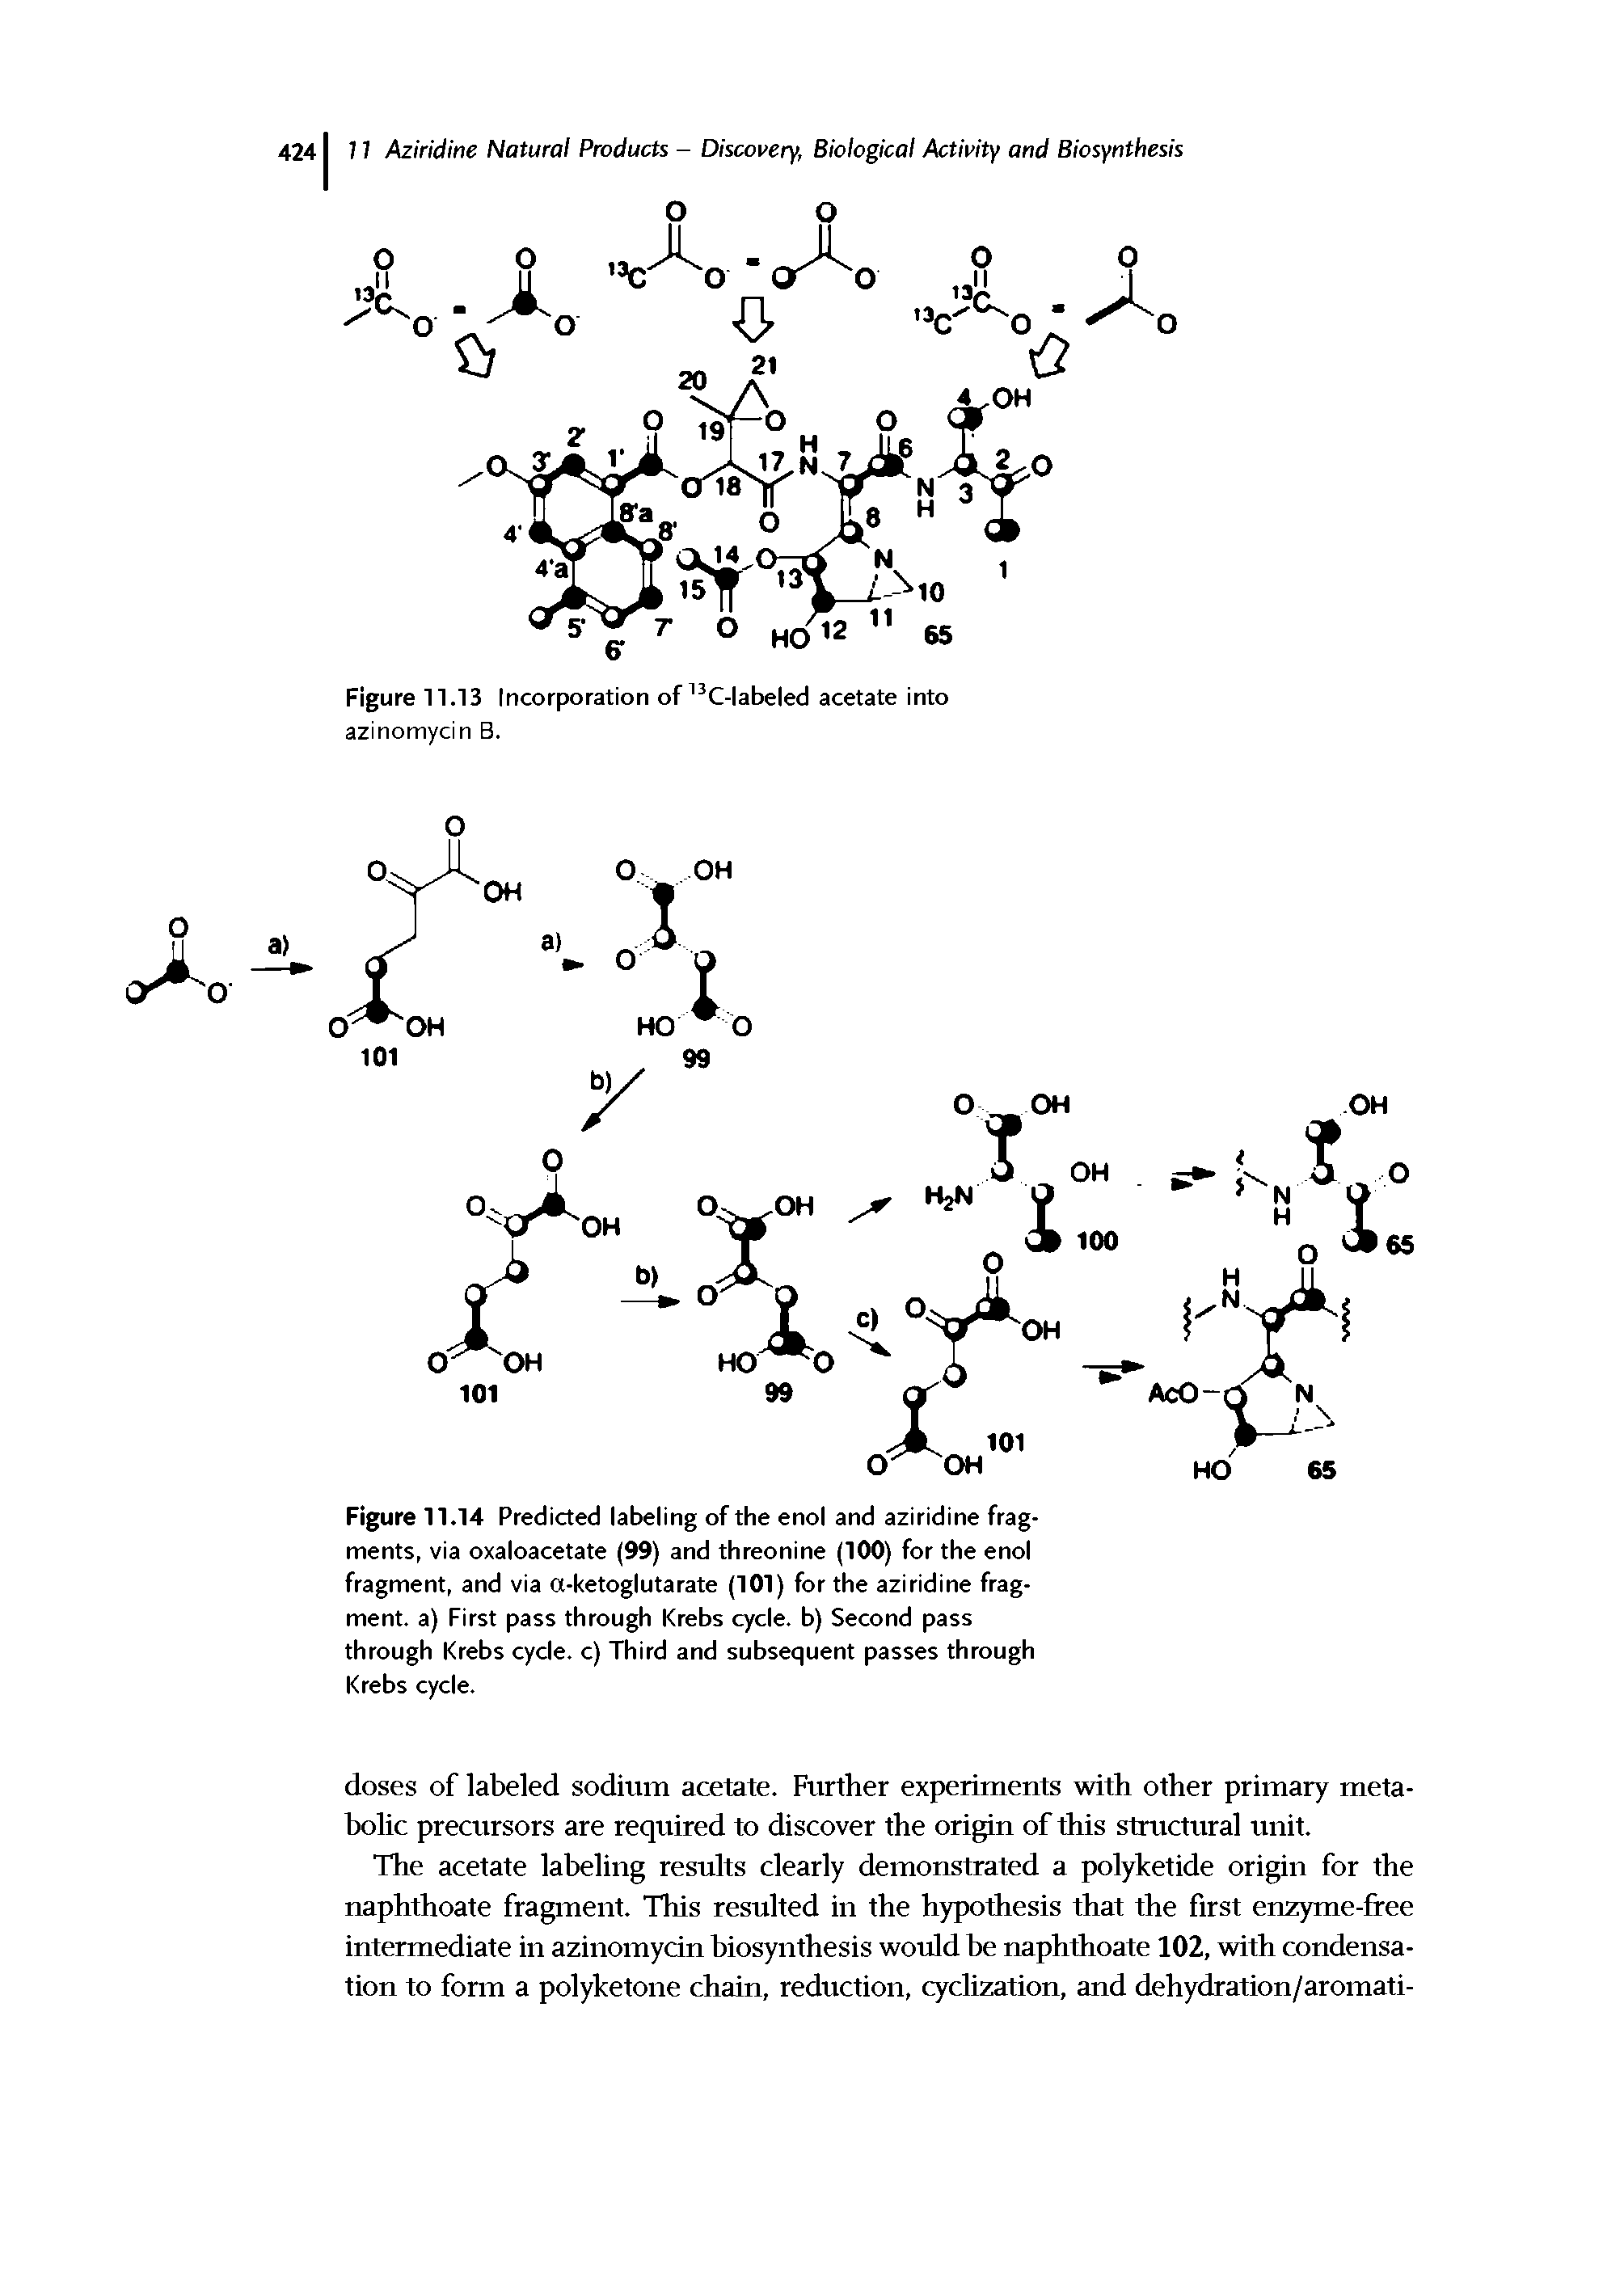 Figure 11.14 Predicted labeling of the enol and aziridine fragments, via oxaloacetate (99) and threonine (100) for the enol fragment, and via a-ketoglutarate (101) for the aziridine fragment. a) First pass through Krebs cycle, b) Second pass through Krebs cycle, c) Third and subsequent passes through Krebs cycle.